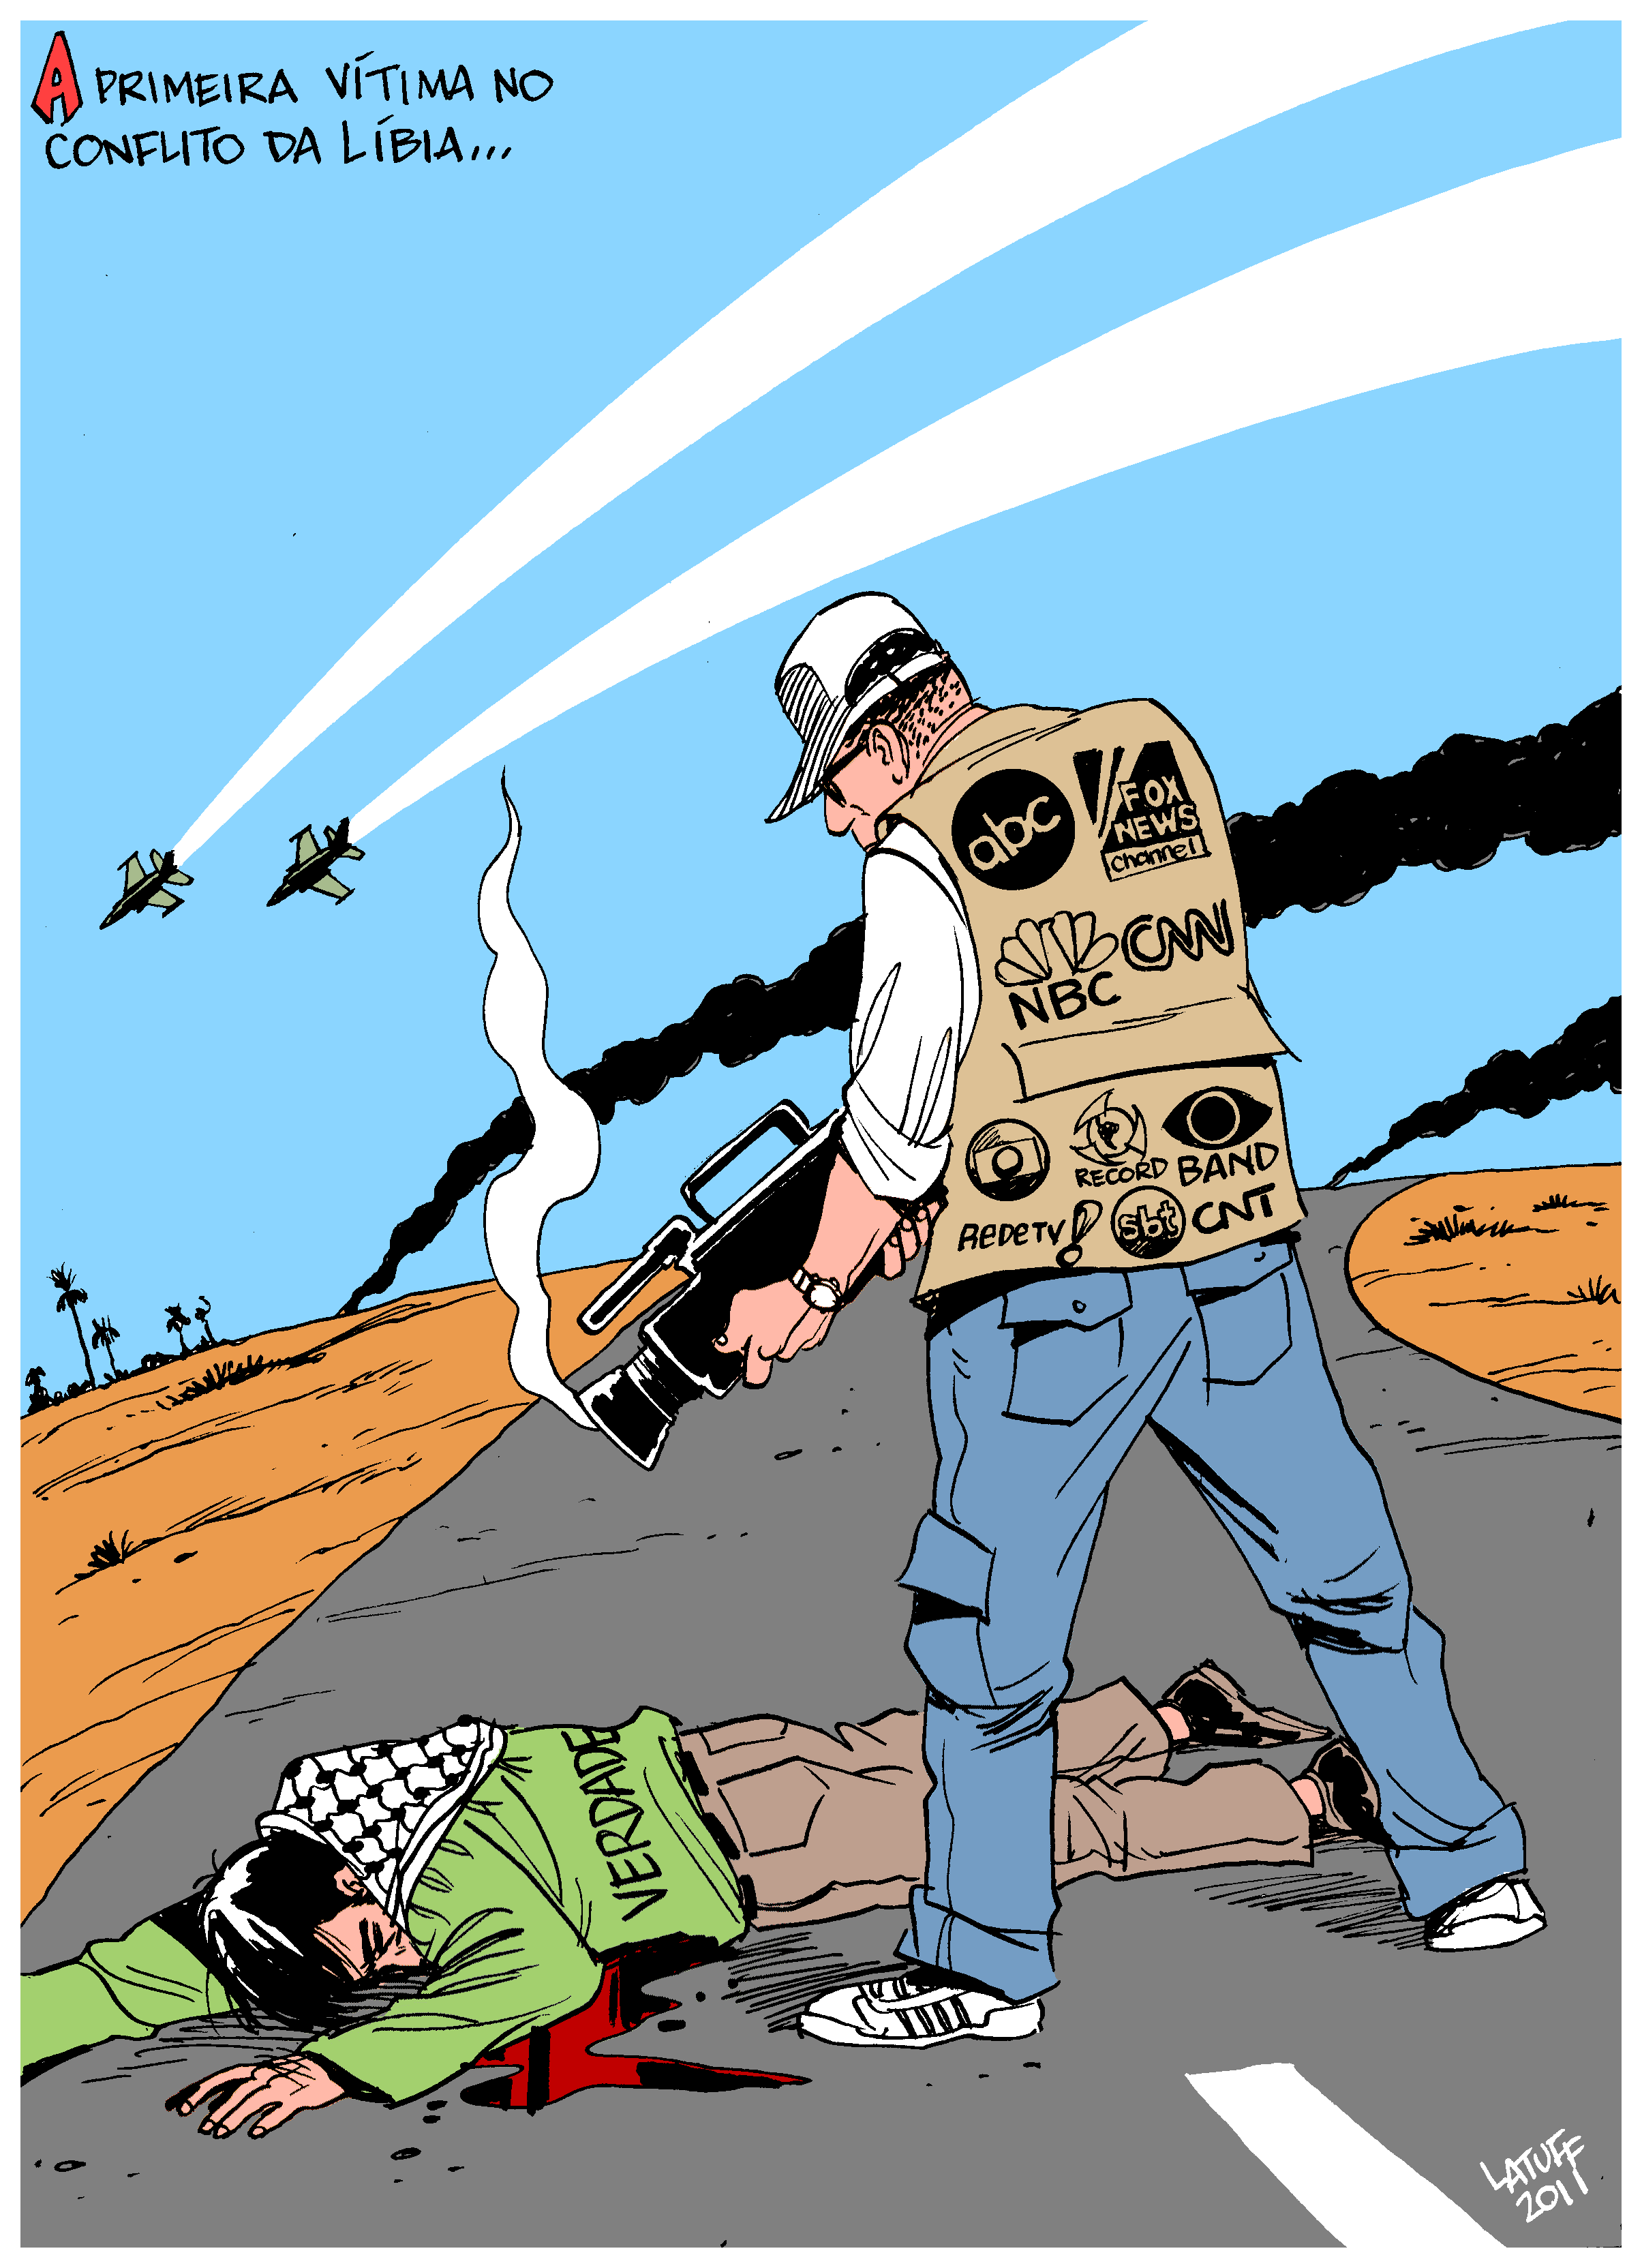 http://mrzine.monthlyreview.org/2011/images/latuff_truth.gif